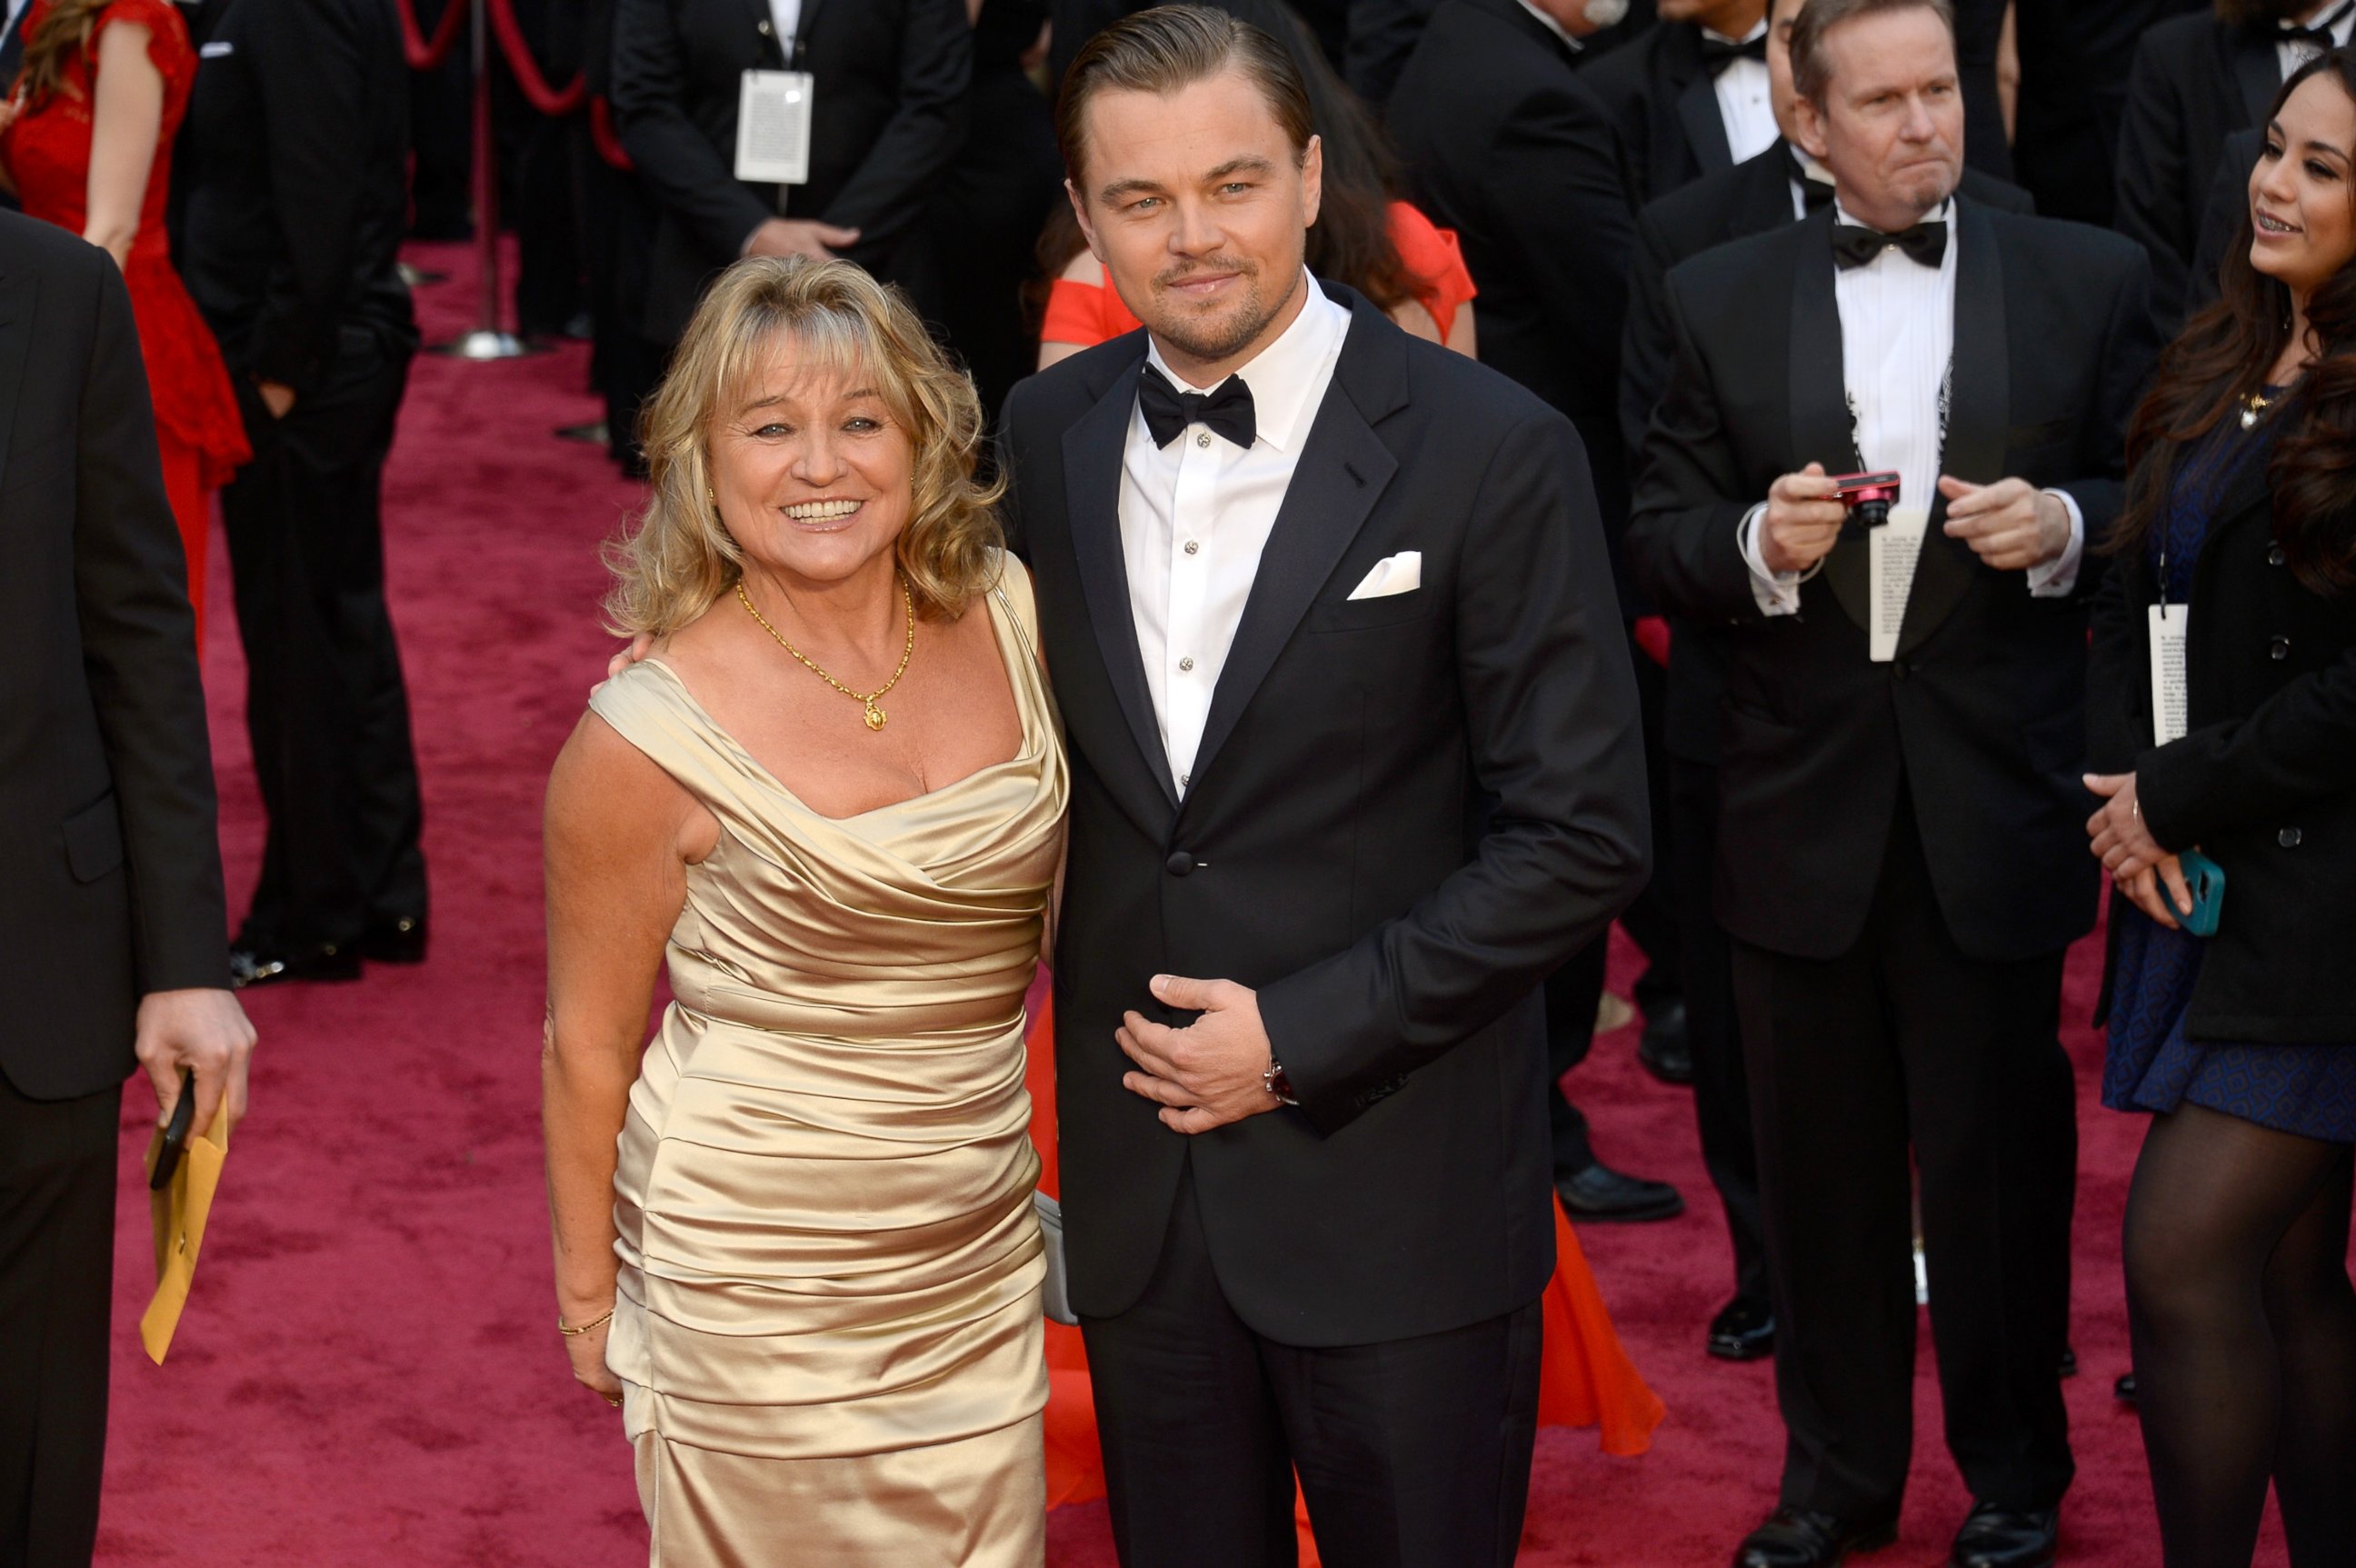 PHOTO: Leonardo DiCaprio and Irmelin Indenbirken attend the Oscars, March 2, 2014 in Hollywood, Calif.